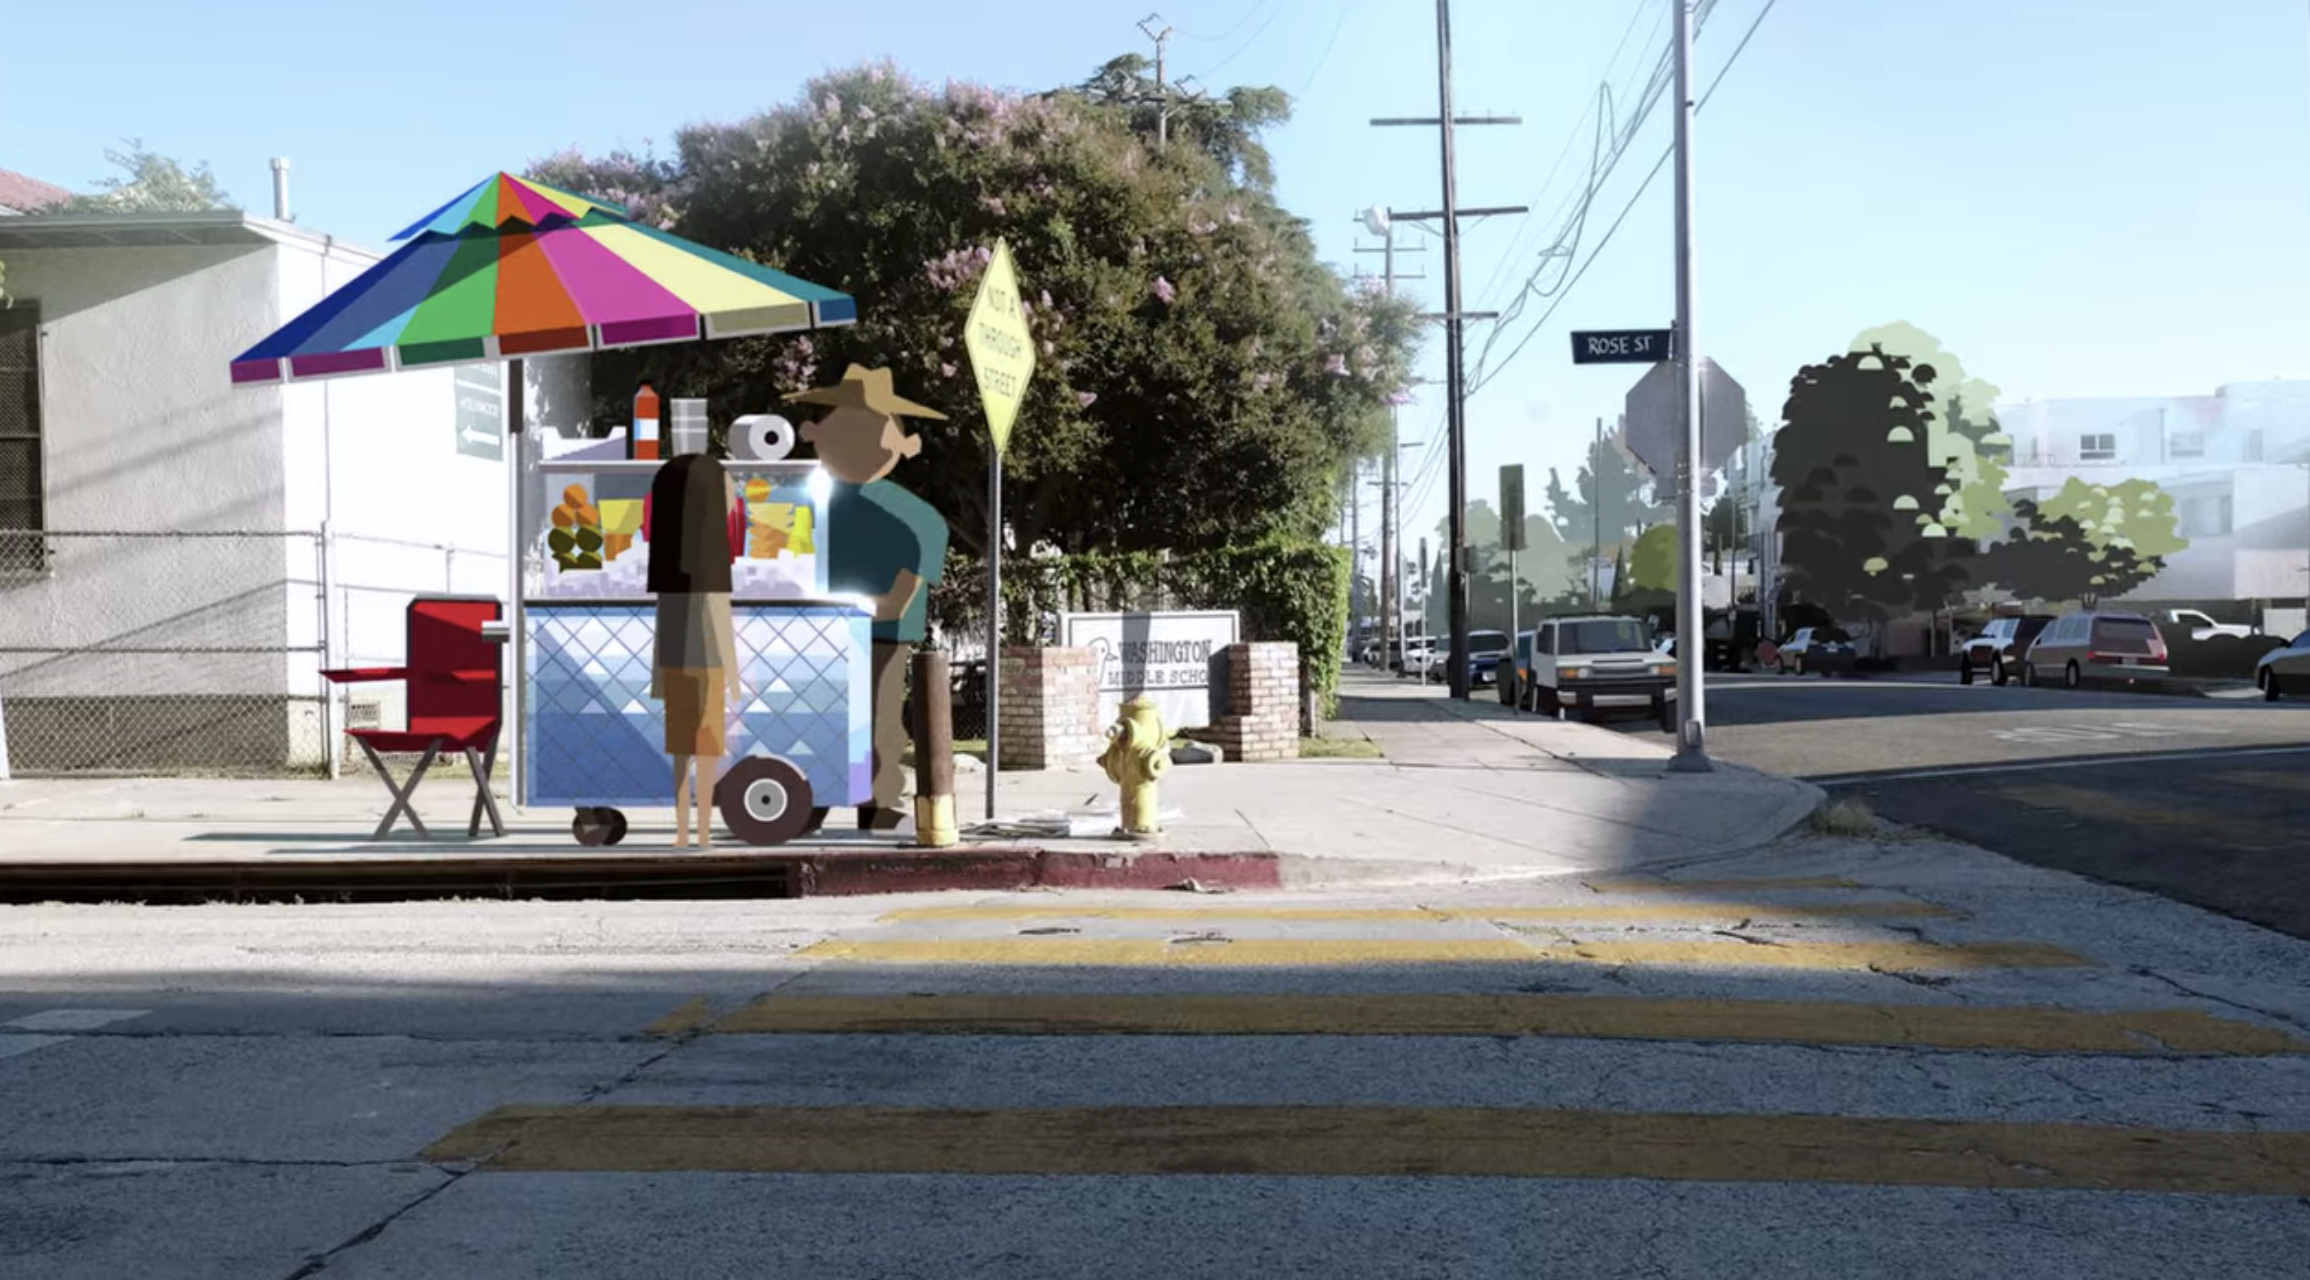 A fruit cart on the street in Los Angeles